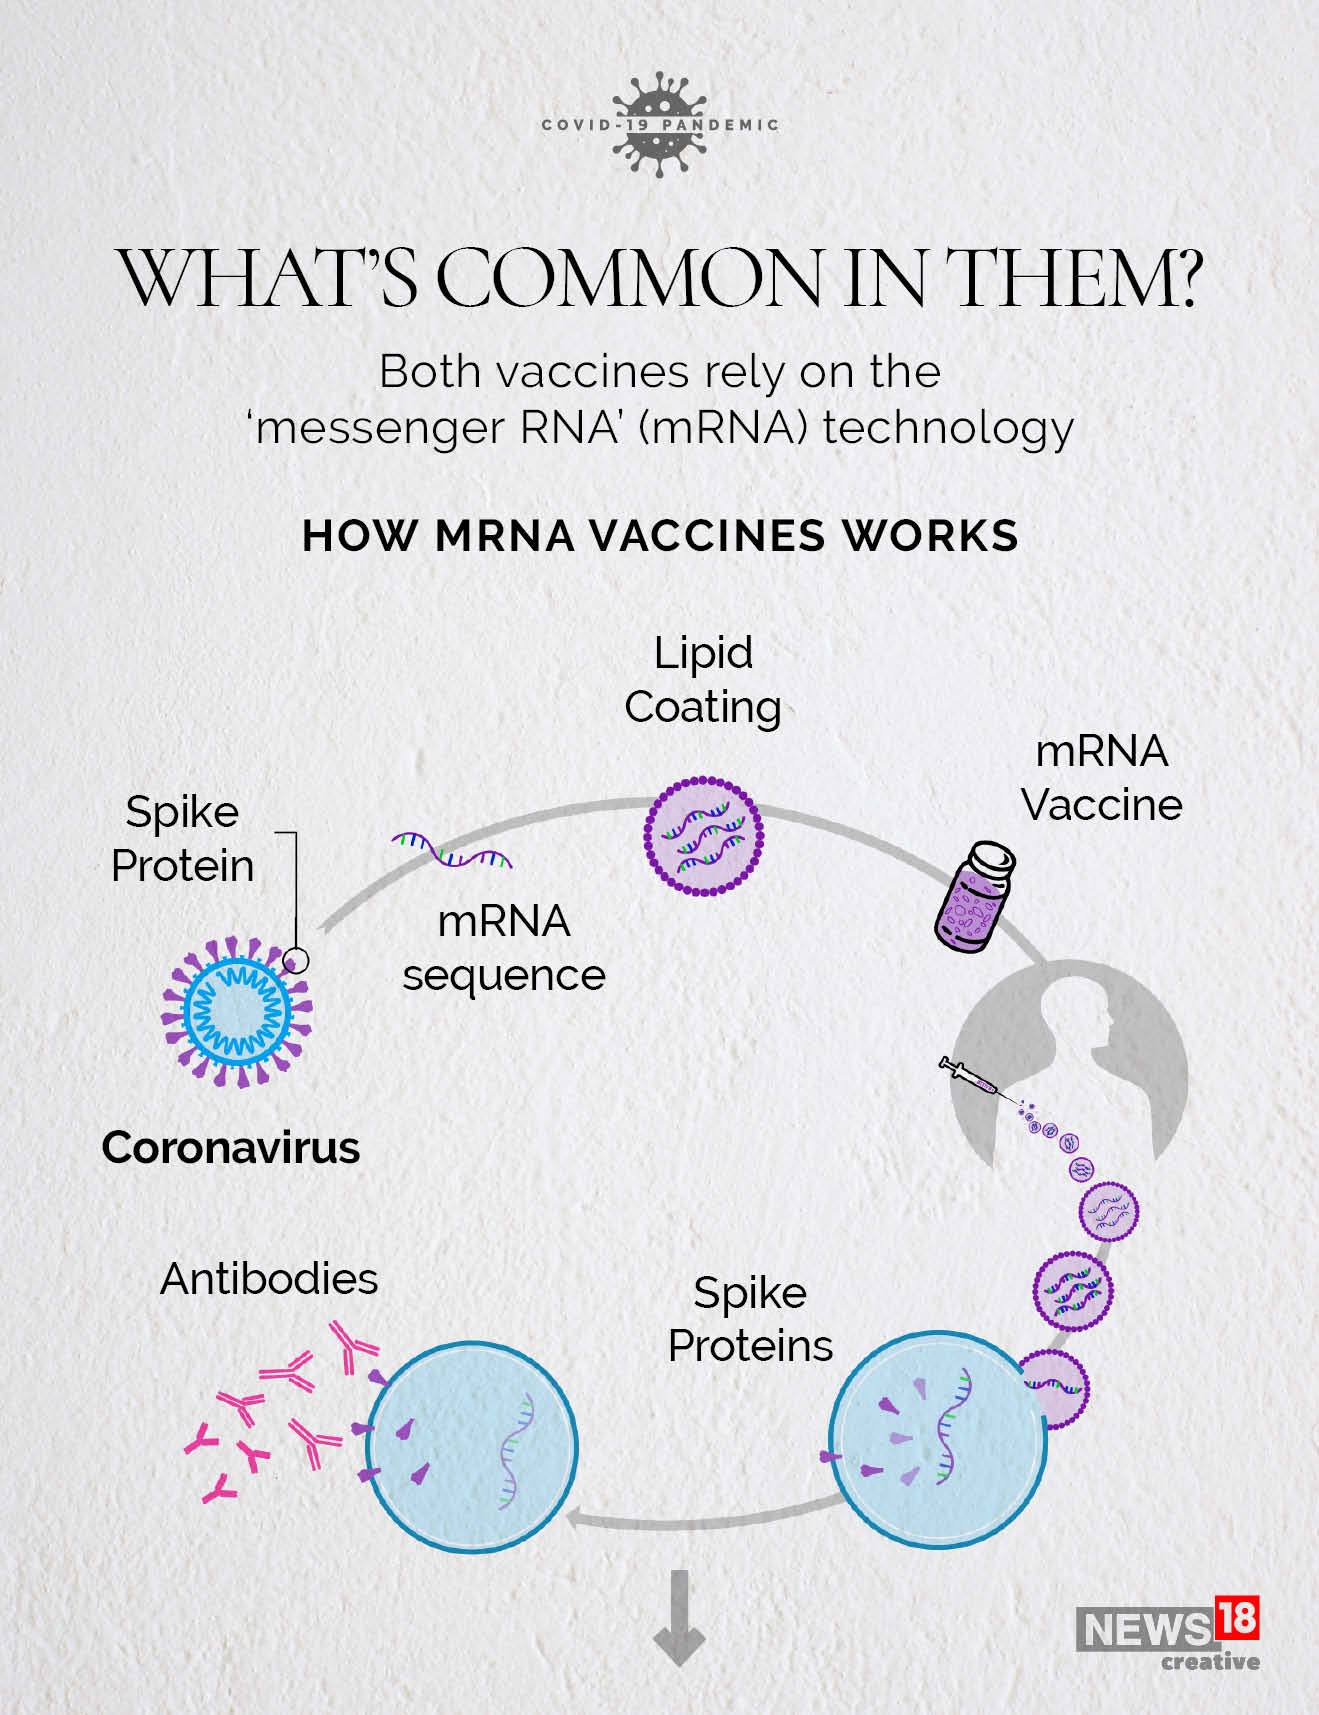 Pfizer vs Moderna: What's different about the vaccines?